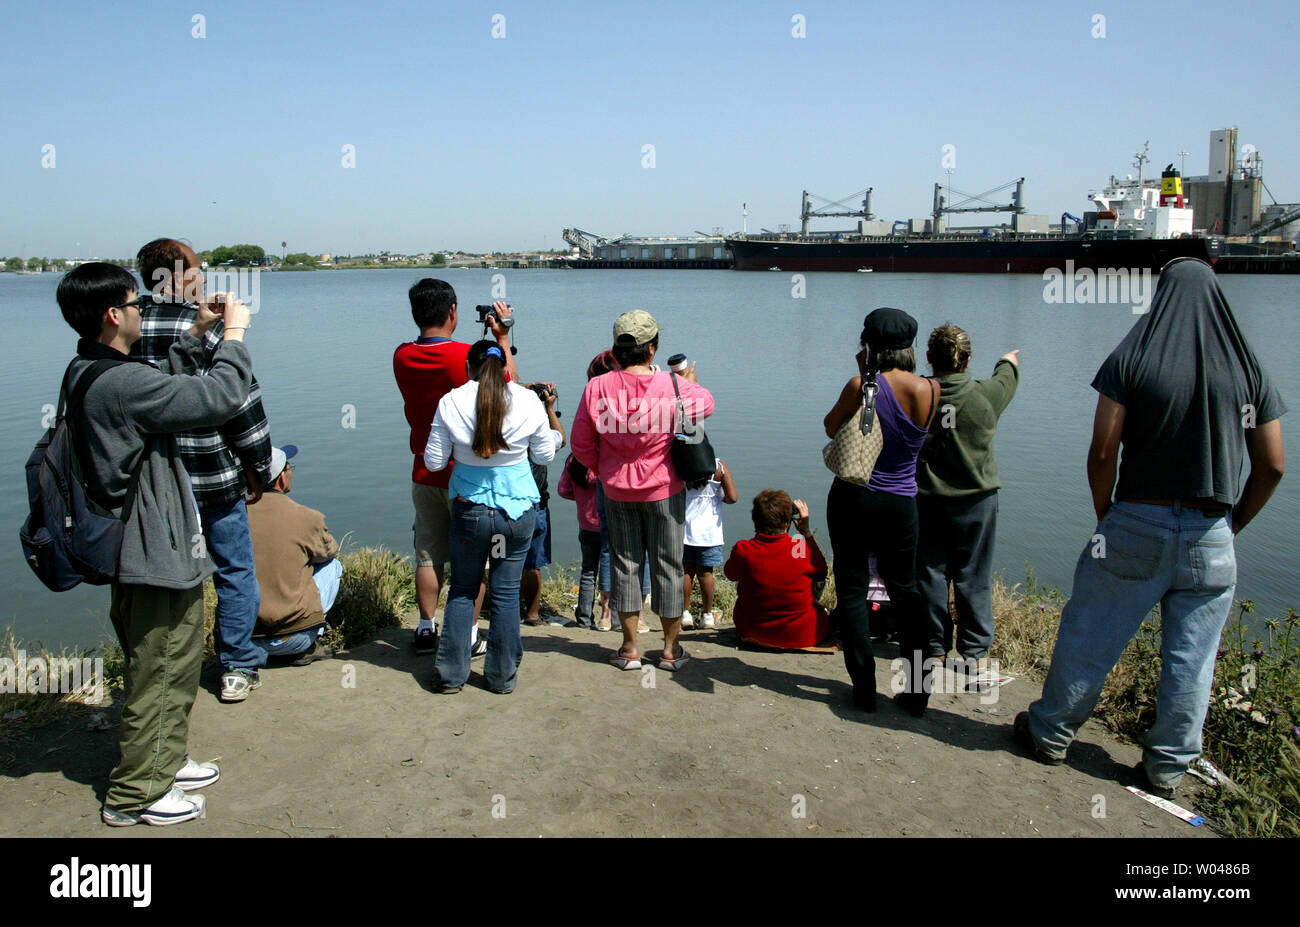 Local Sacramento residents watch as two humpback whales swims in the Port of Sacramento, West Sacramento, California, on May 17, 2007. Two humpback whales, a mother and her calf, swum up the deep water shipping channel to the Port of Sacramento late Tuesday. Experts will use underwater microphones emitting whale sounds in an attempt to lure the whales back out to the open ocean.   (UPI Photo/Ken James) Stock Photo